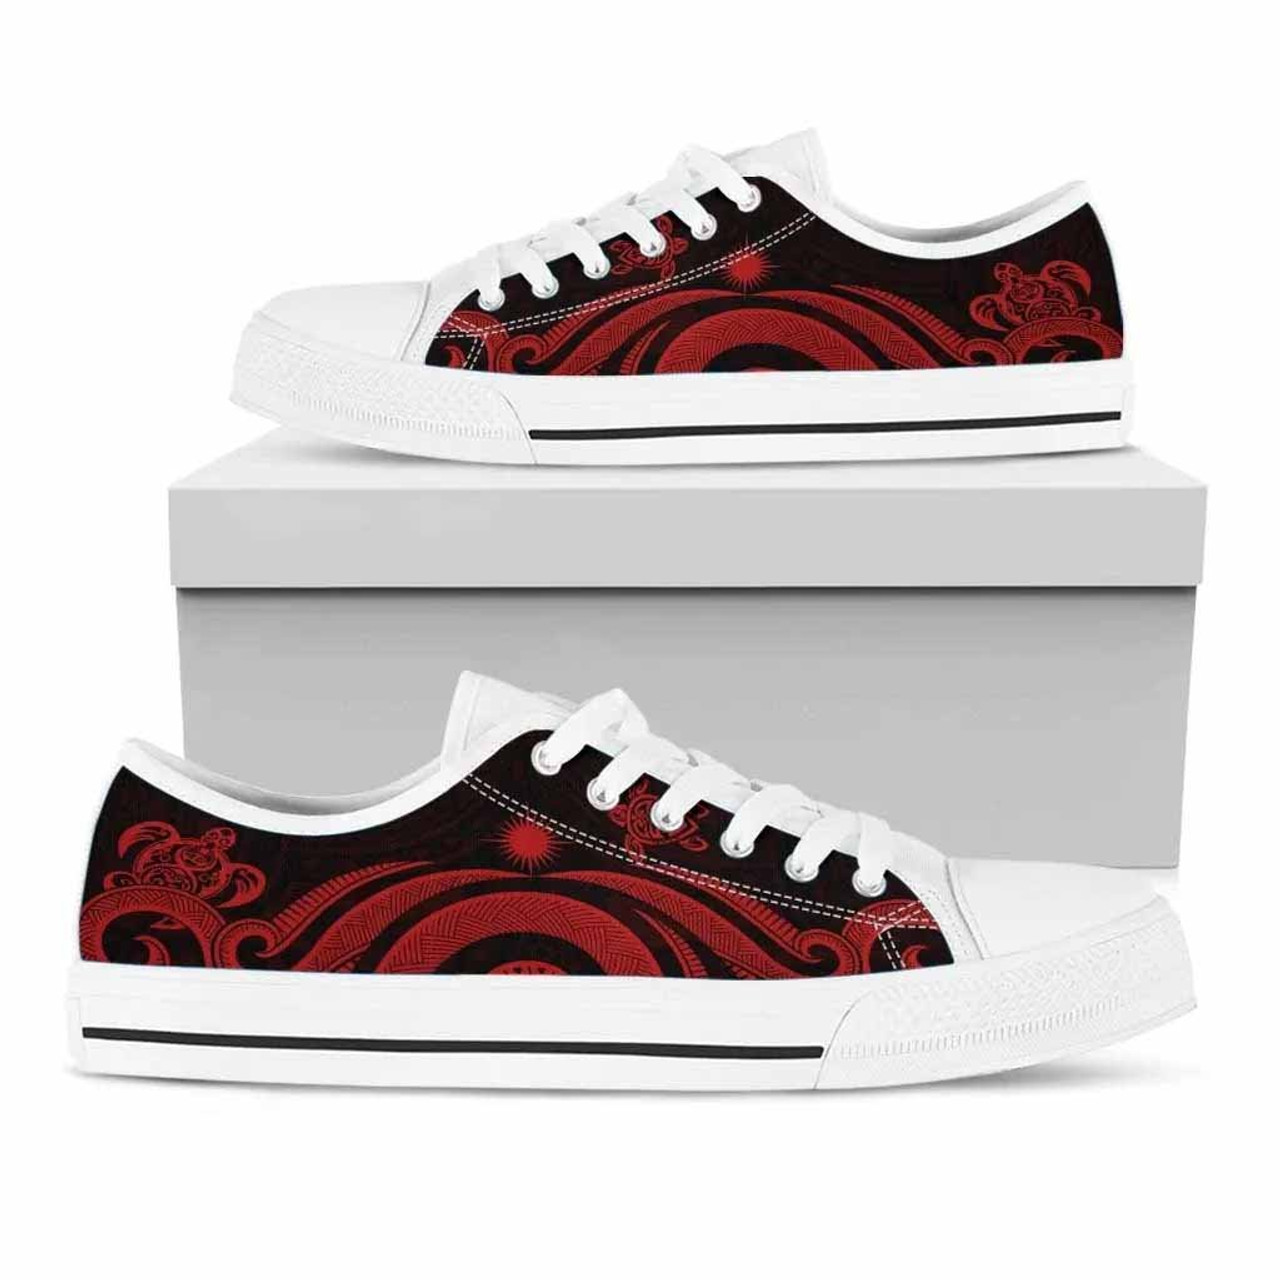 Marshall Islands Low Top Canvas Shoes - Red Tentacle Turtle 7